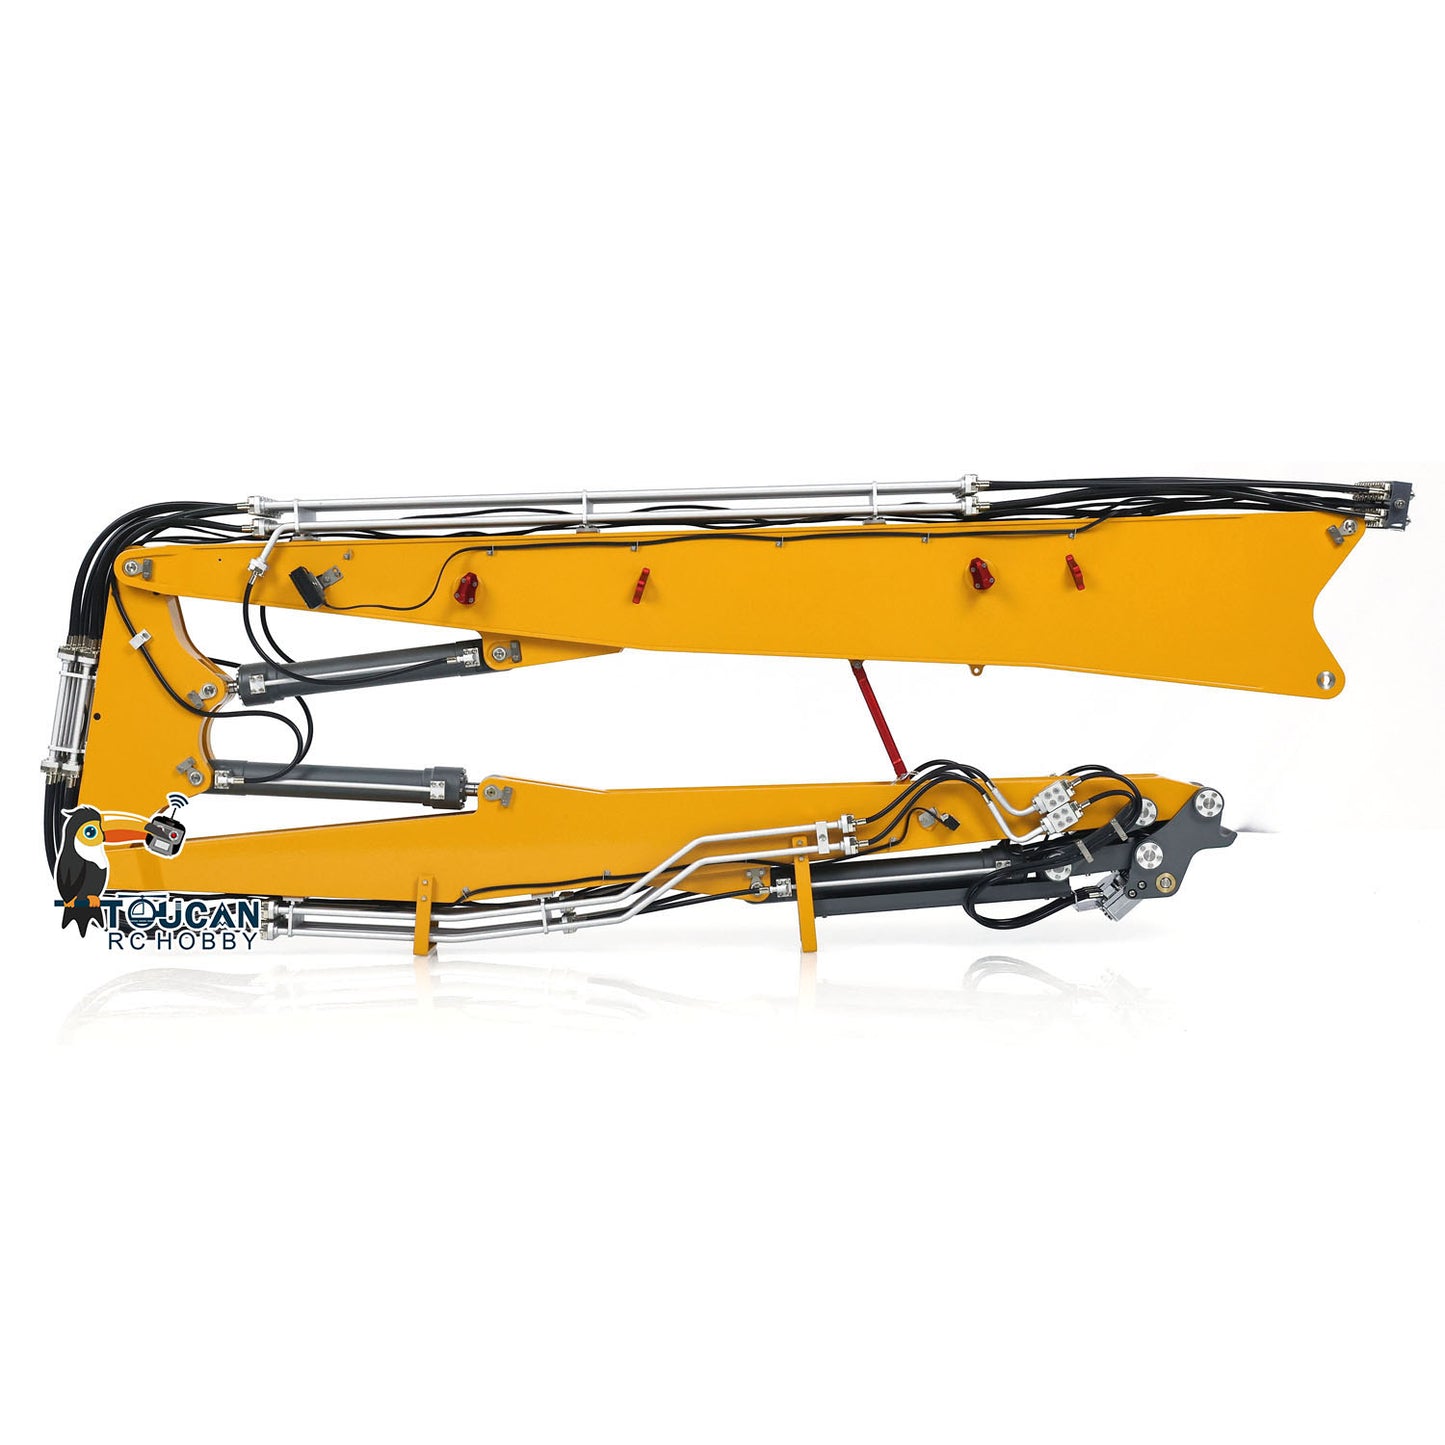 IN STOCK Metal Demolition Arm Rack for CUT CUT K970-300 RC Hydraulic Excavator Radio Controlled Diggers Hobby Model DIY Parts